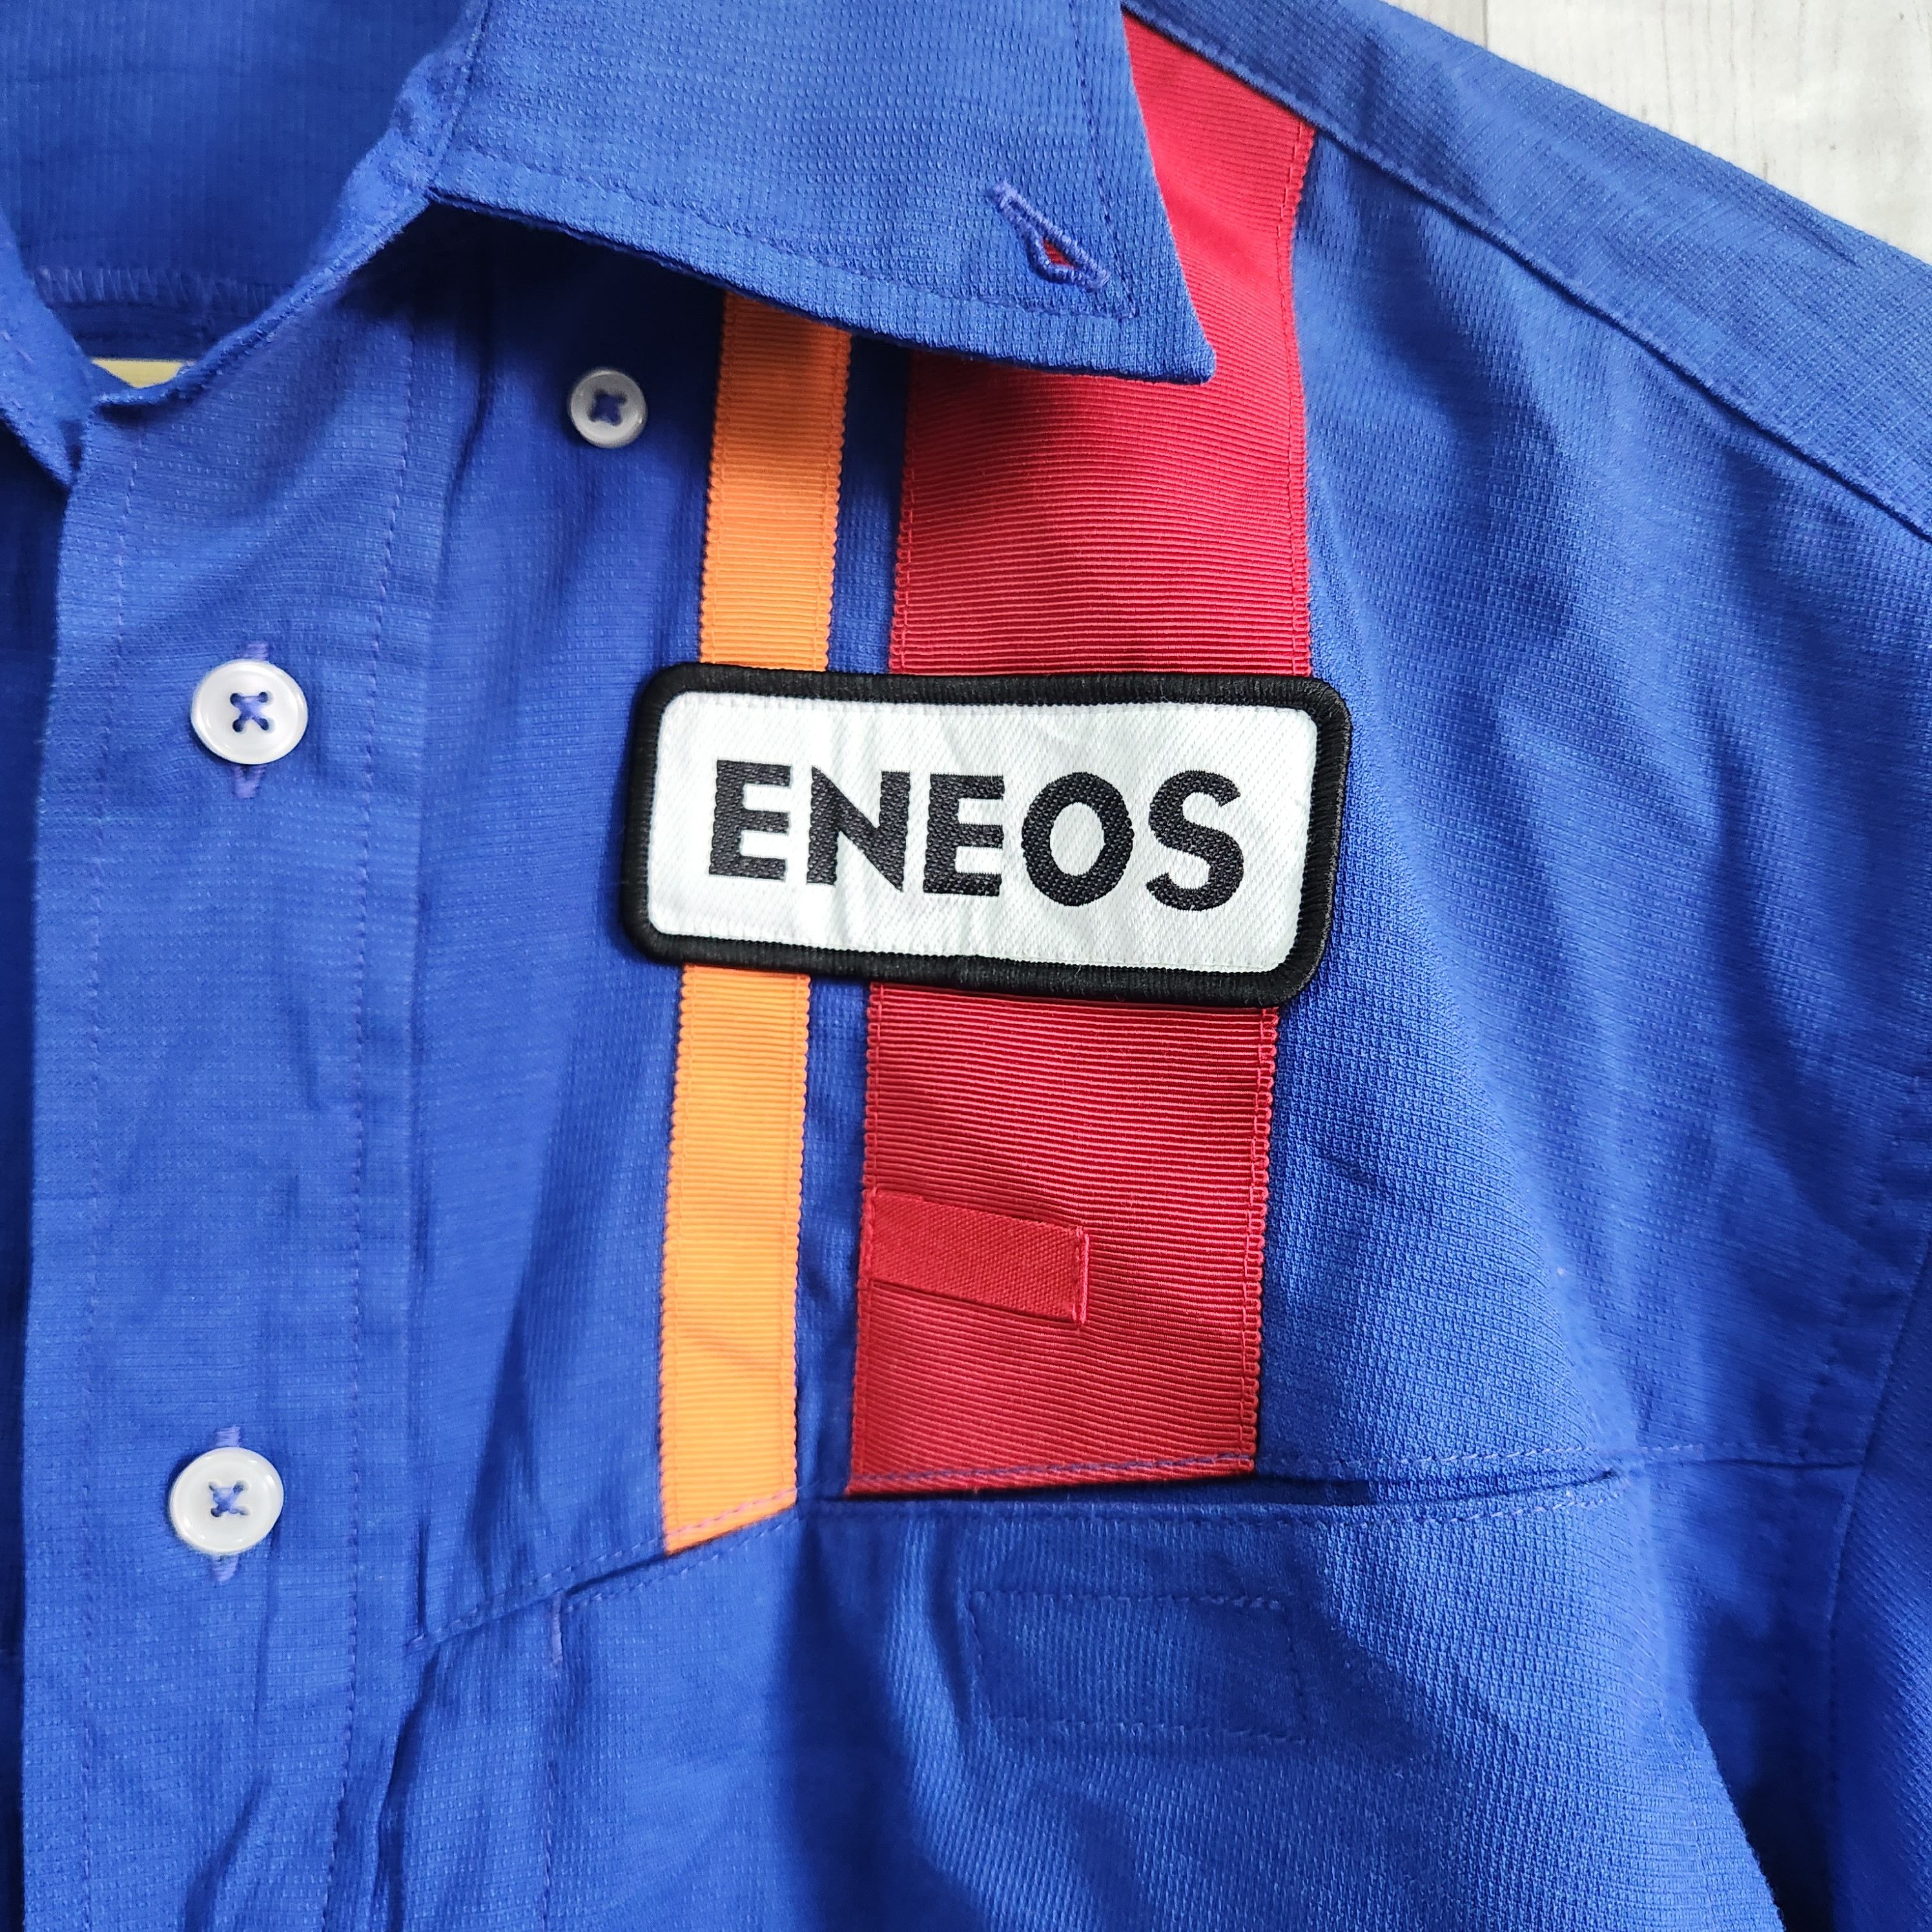 Vintage Japan ENEOS Workers Outlet Shirts - 11